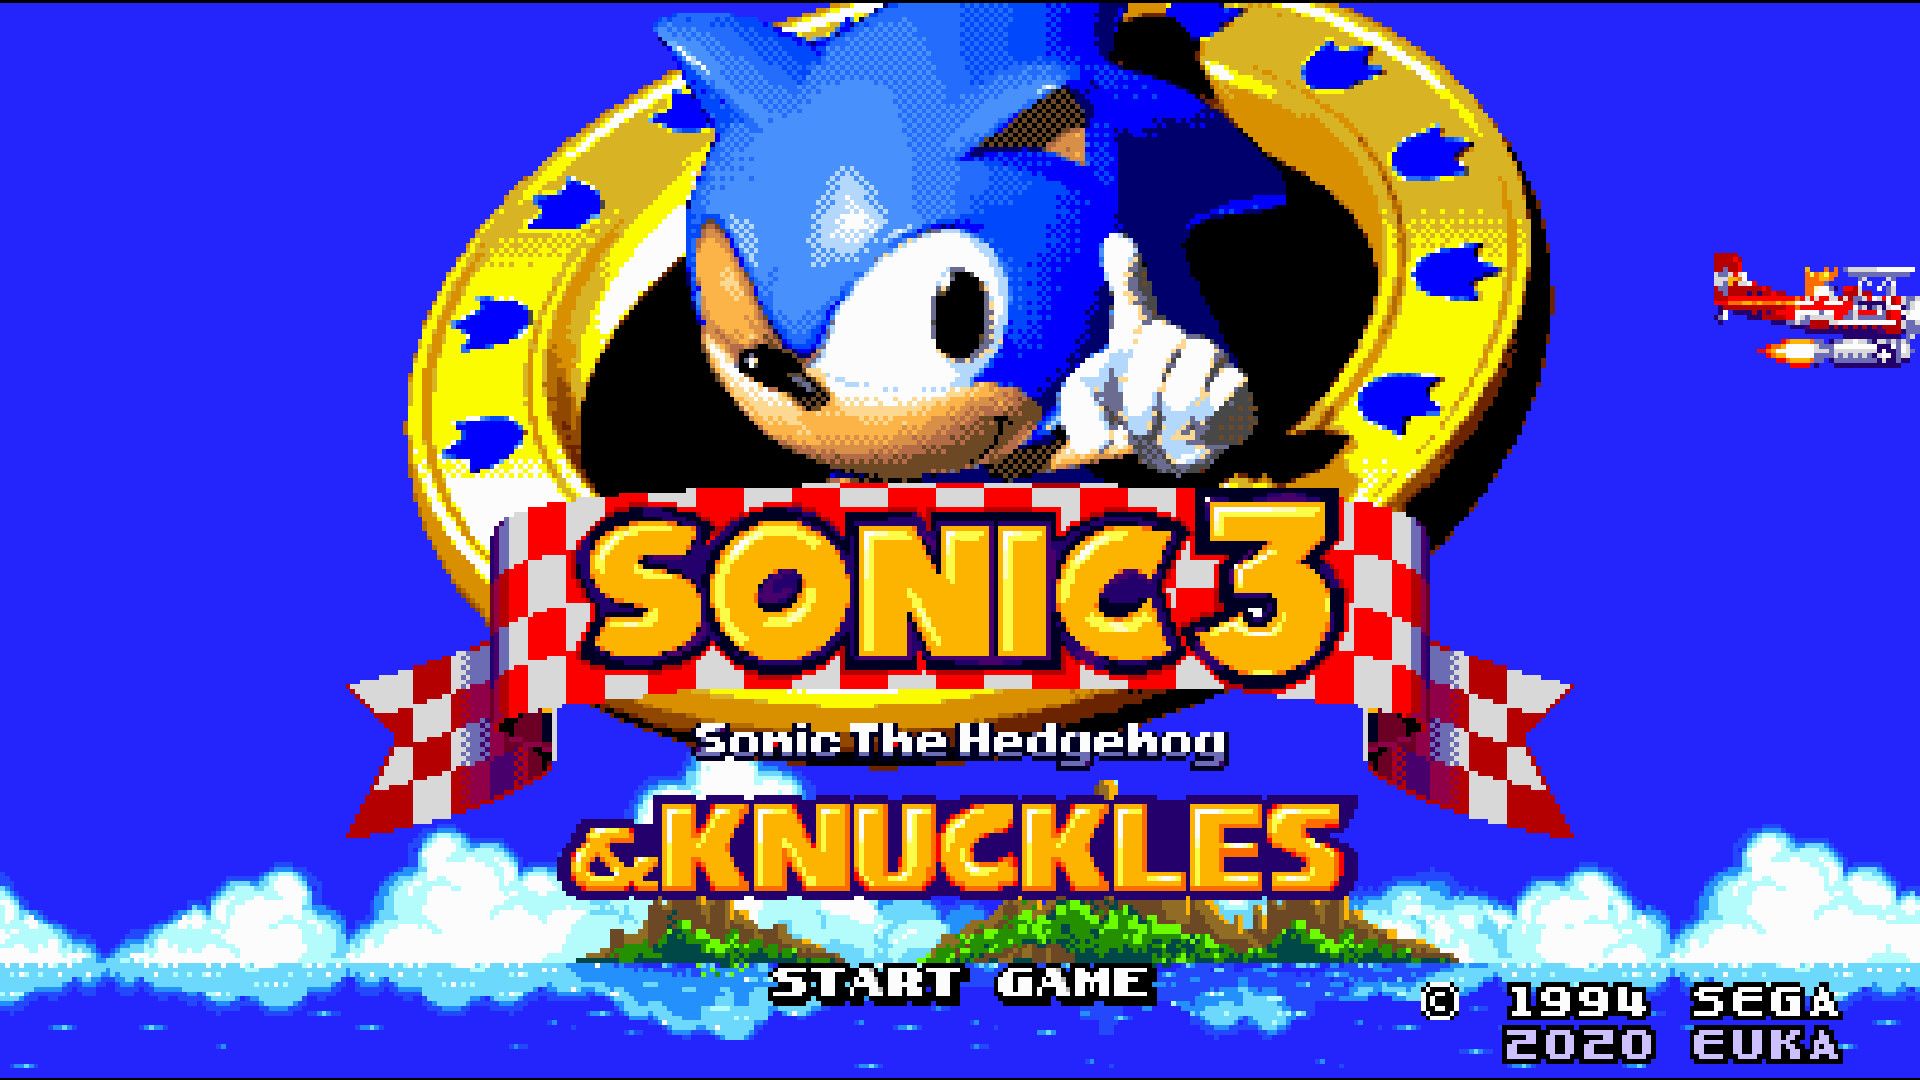 Iteration Over Innovation in Sonic 3 & Knuckles